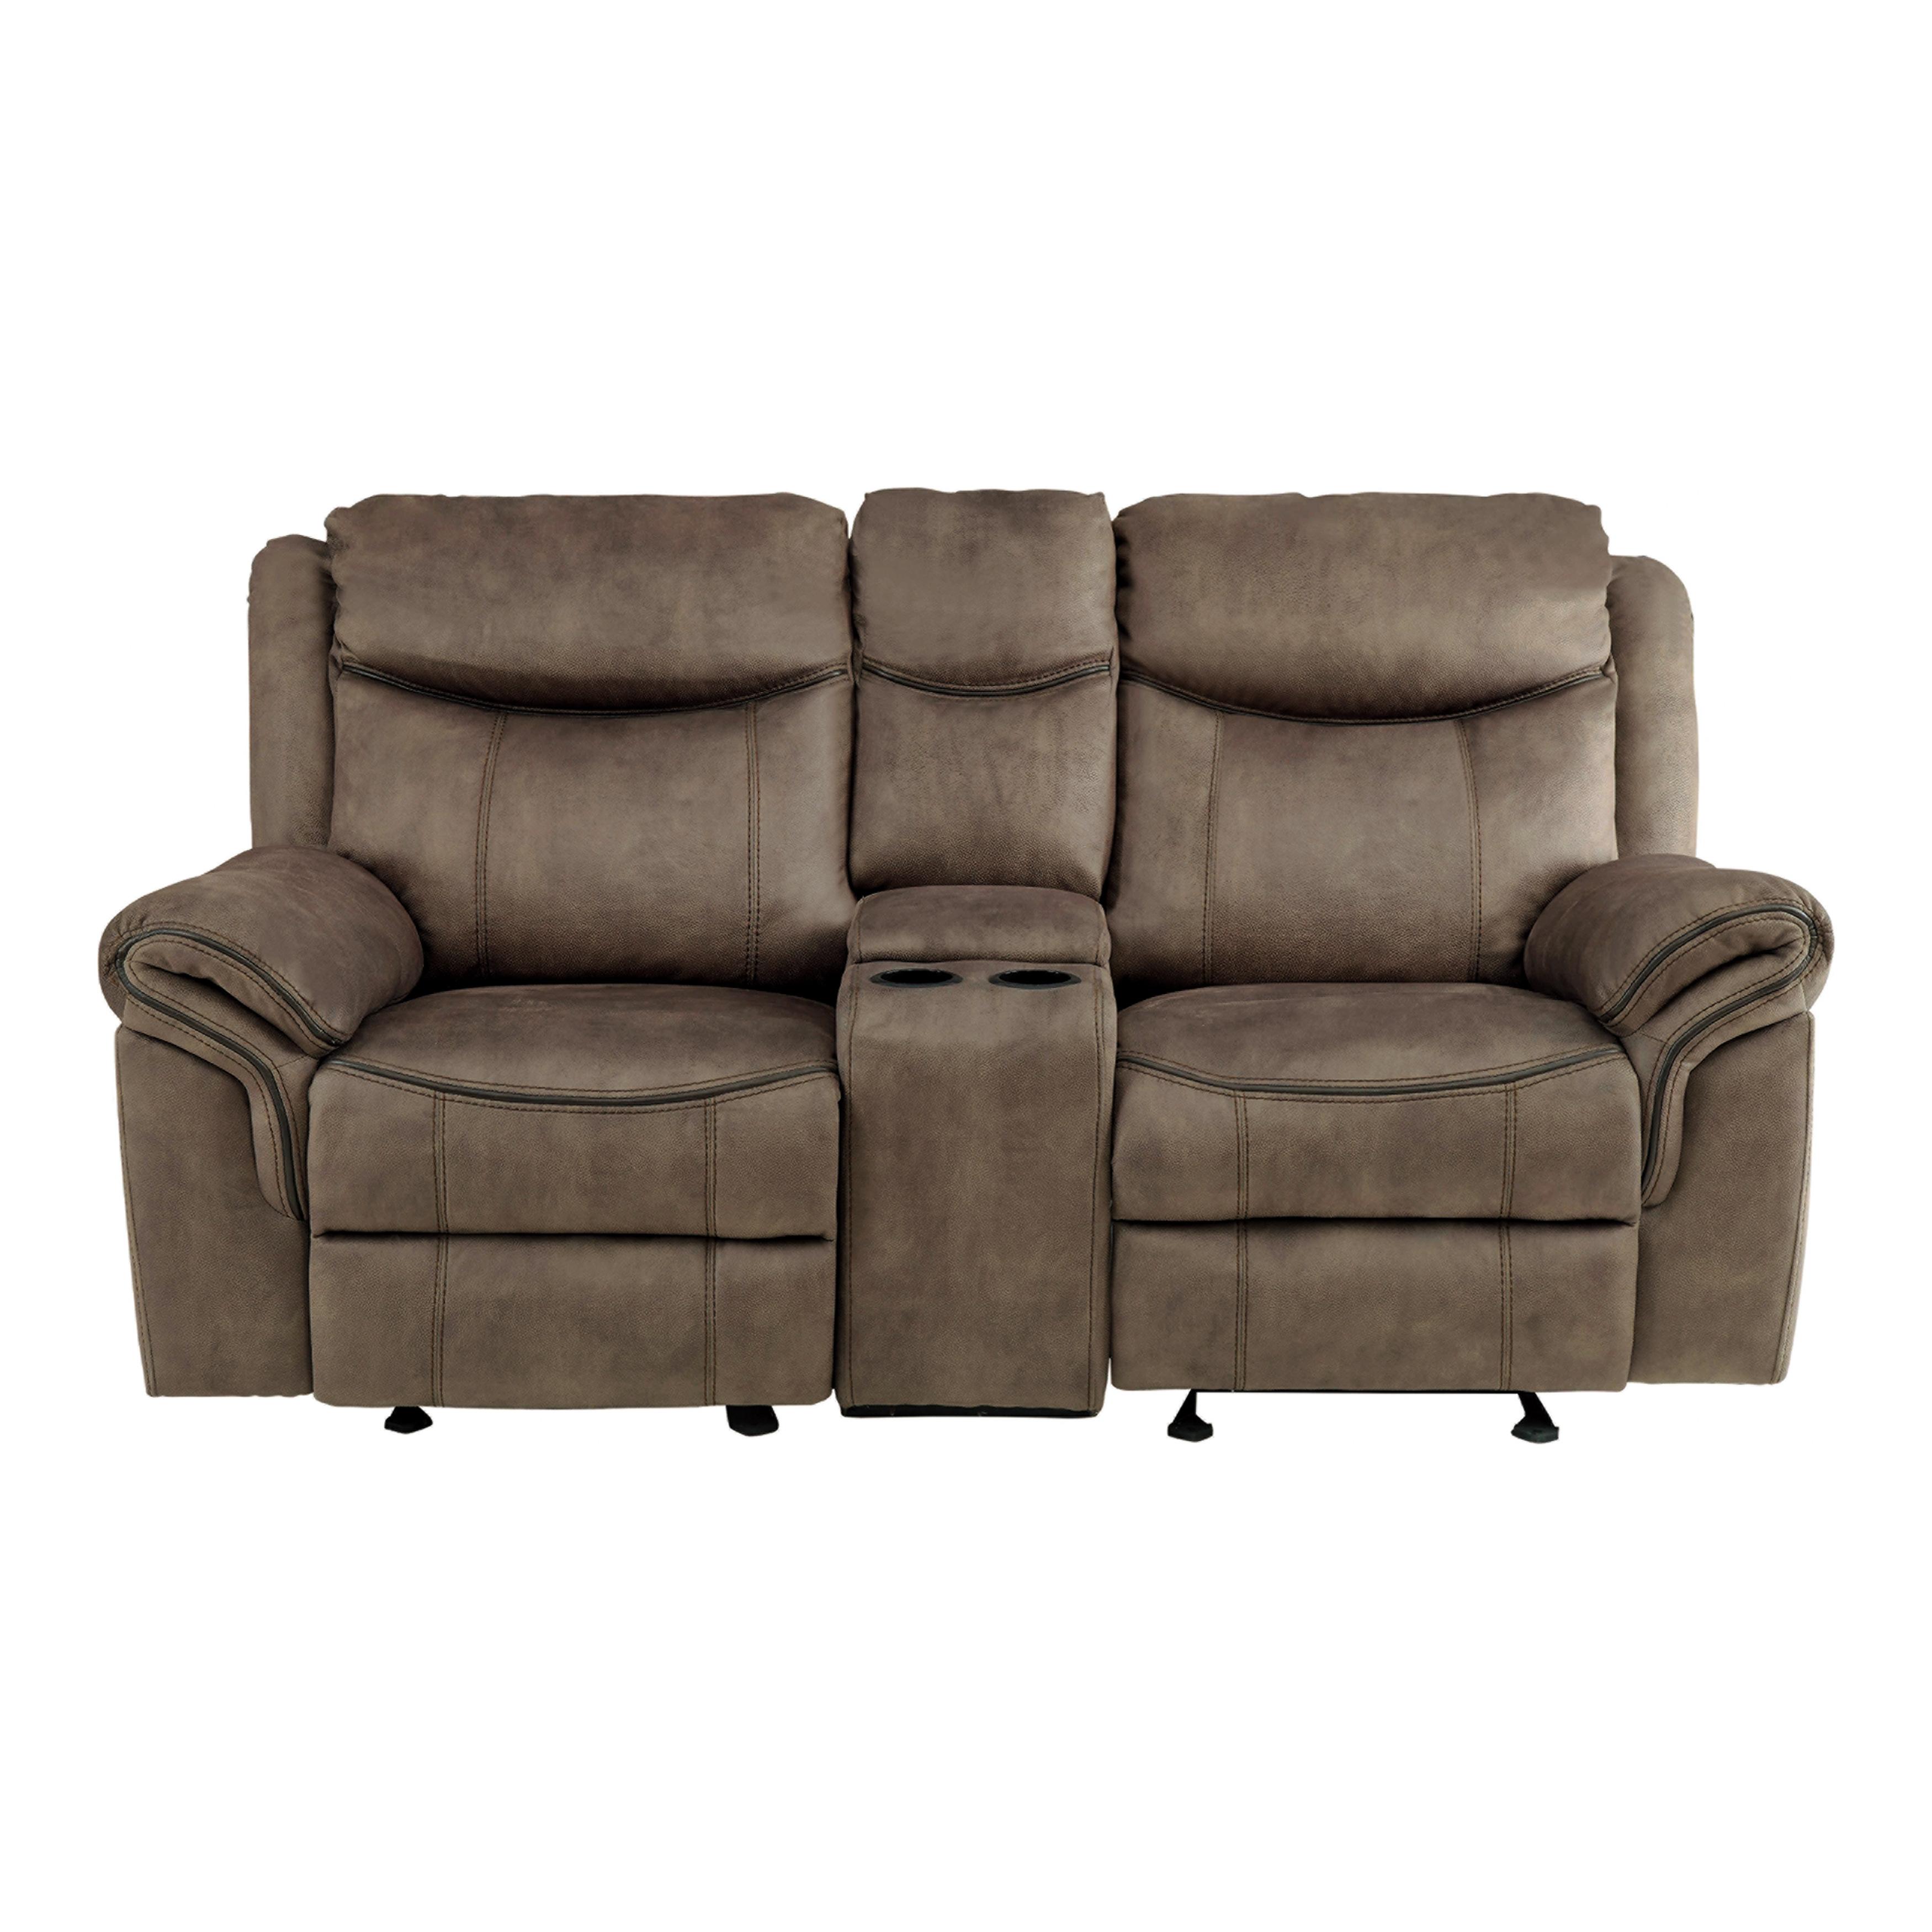 Transitional Reclining Loveseat 8206NF-2 Aram 8206NF-2 in Brown Faux Leather